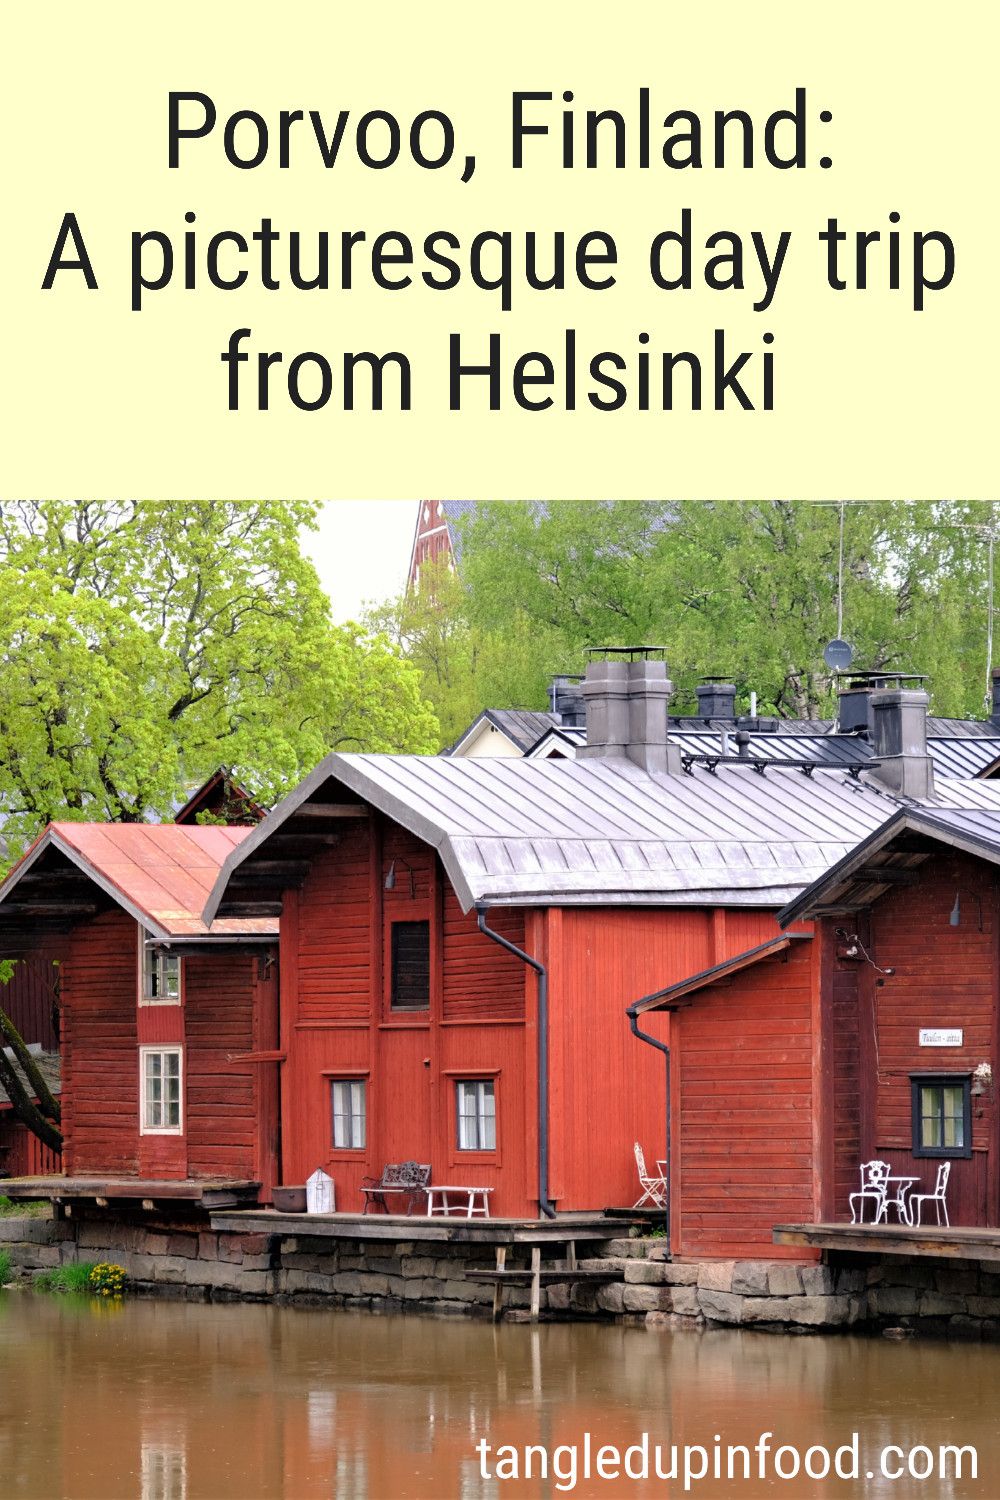 Picture of red wooden houses along a river with text reading "Porvoo, Finland: A picturesque day trip from Helsinki"